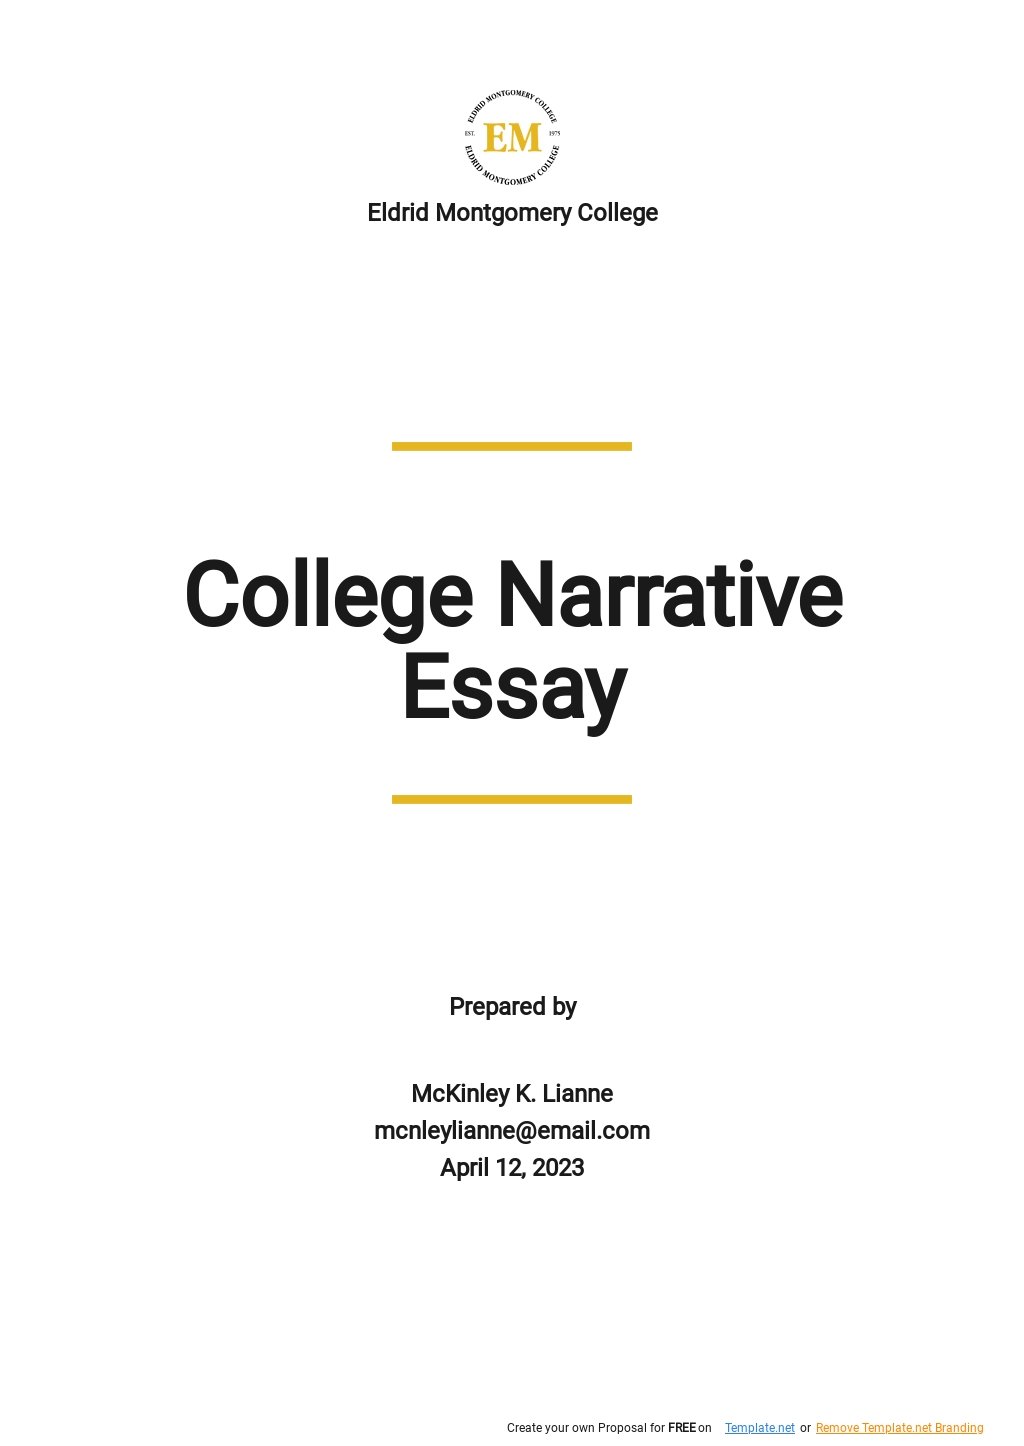 College Narrative Essay Template in Word, Google Docs, Apple Pages